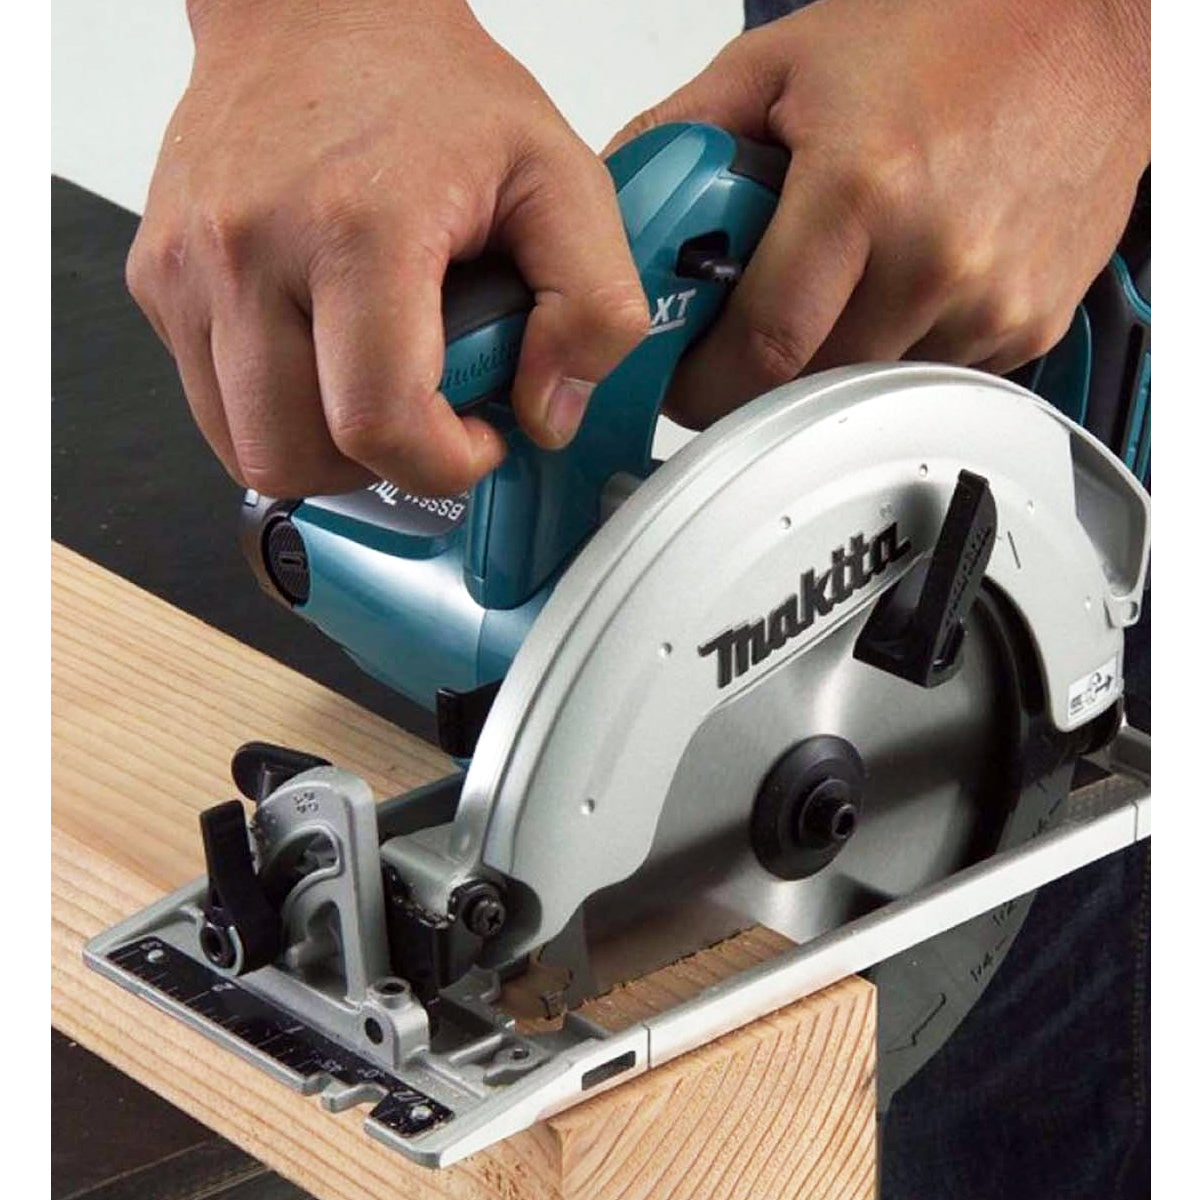 Makita 18v Cordless Twin Pack Circular Saw With 18V Jigsaw Body Only